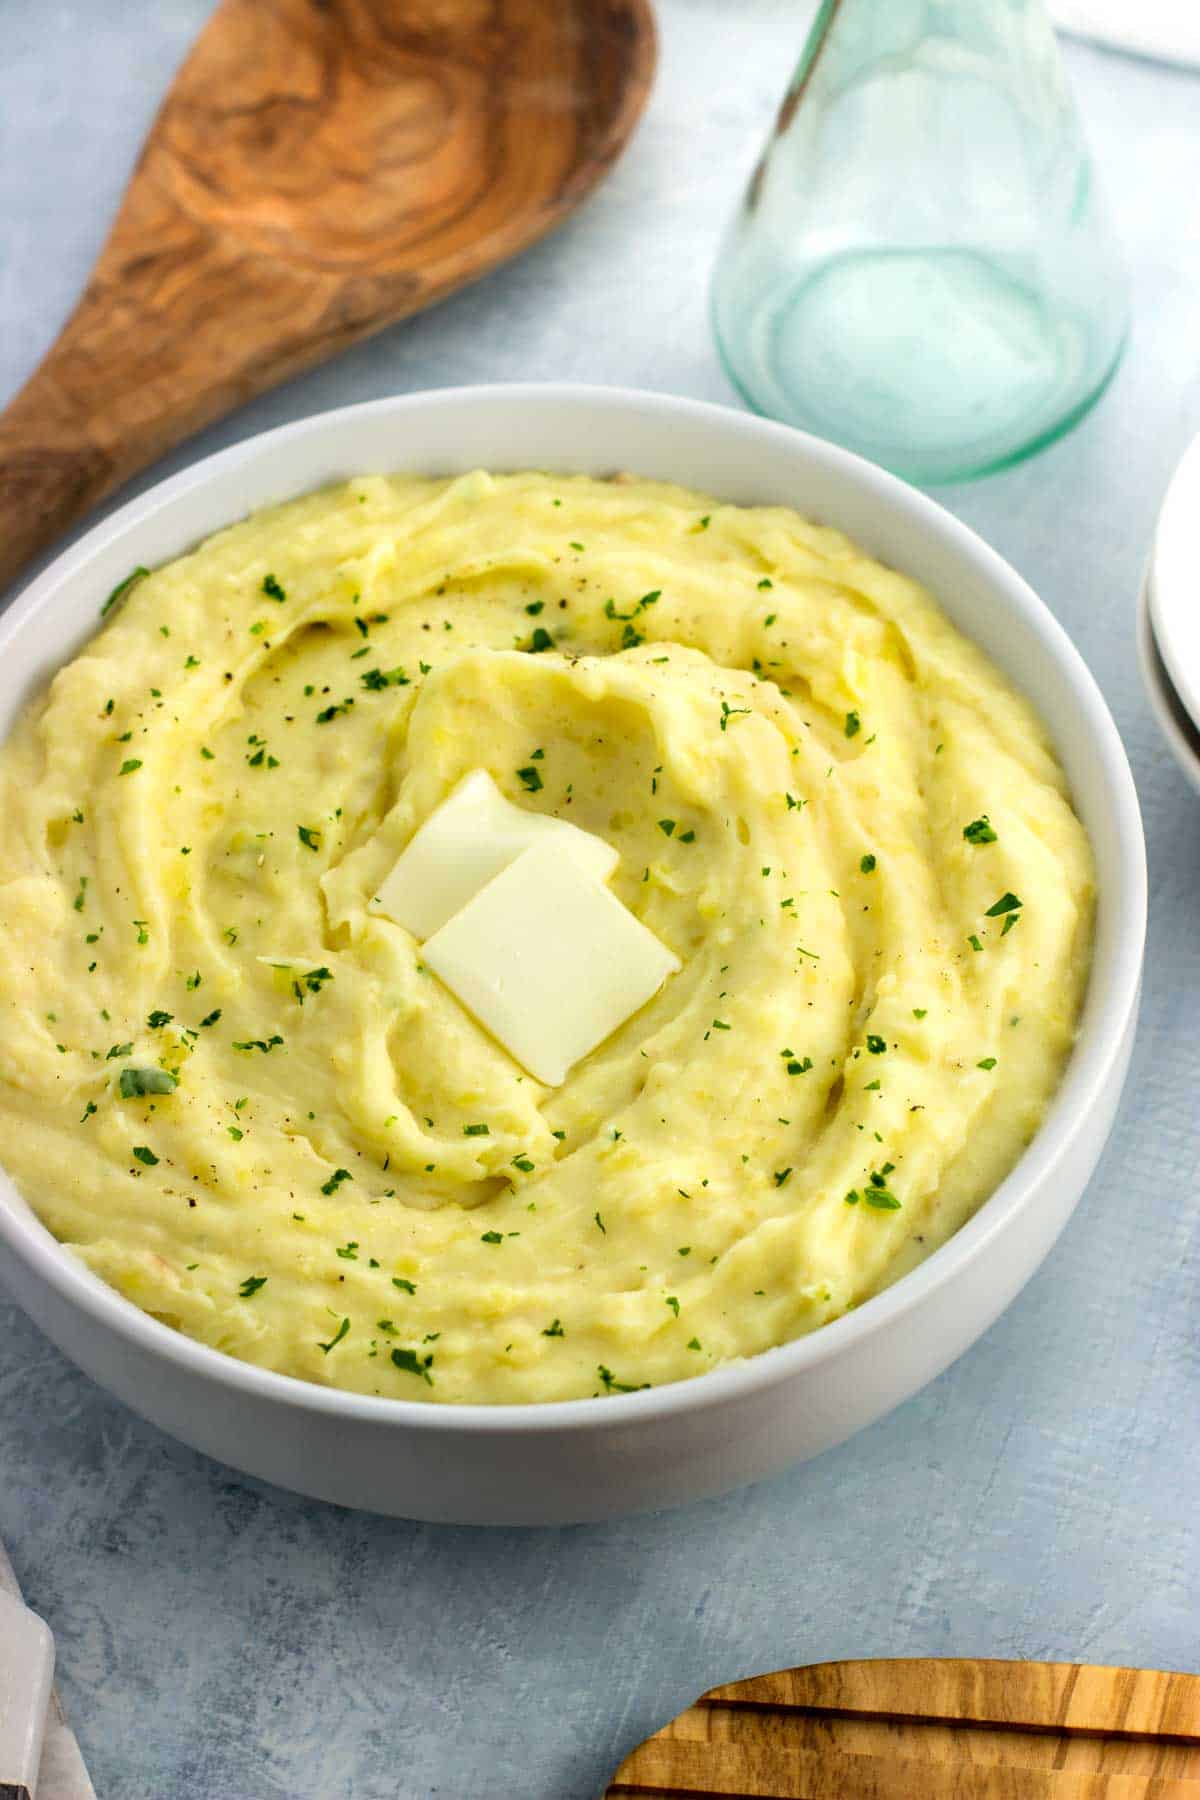 A serving bowl of mashed potatoes topped with a melting pat of butter.